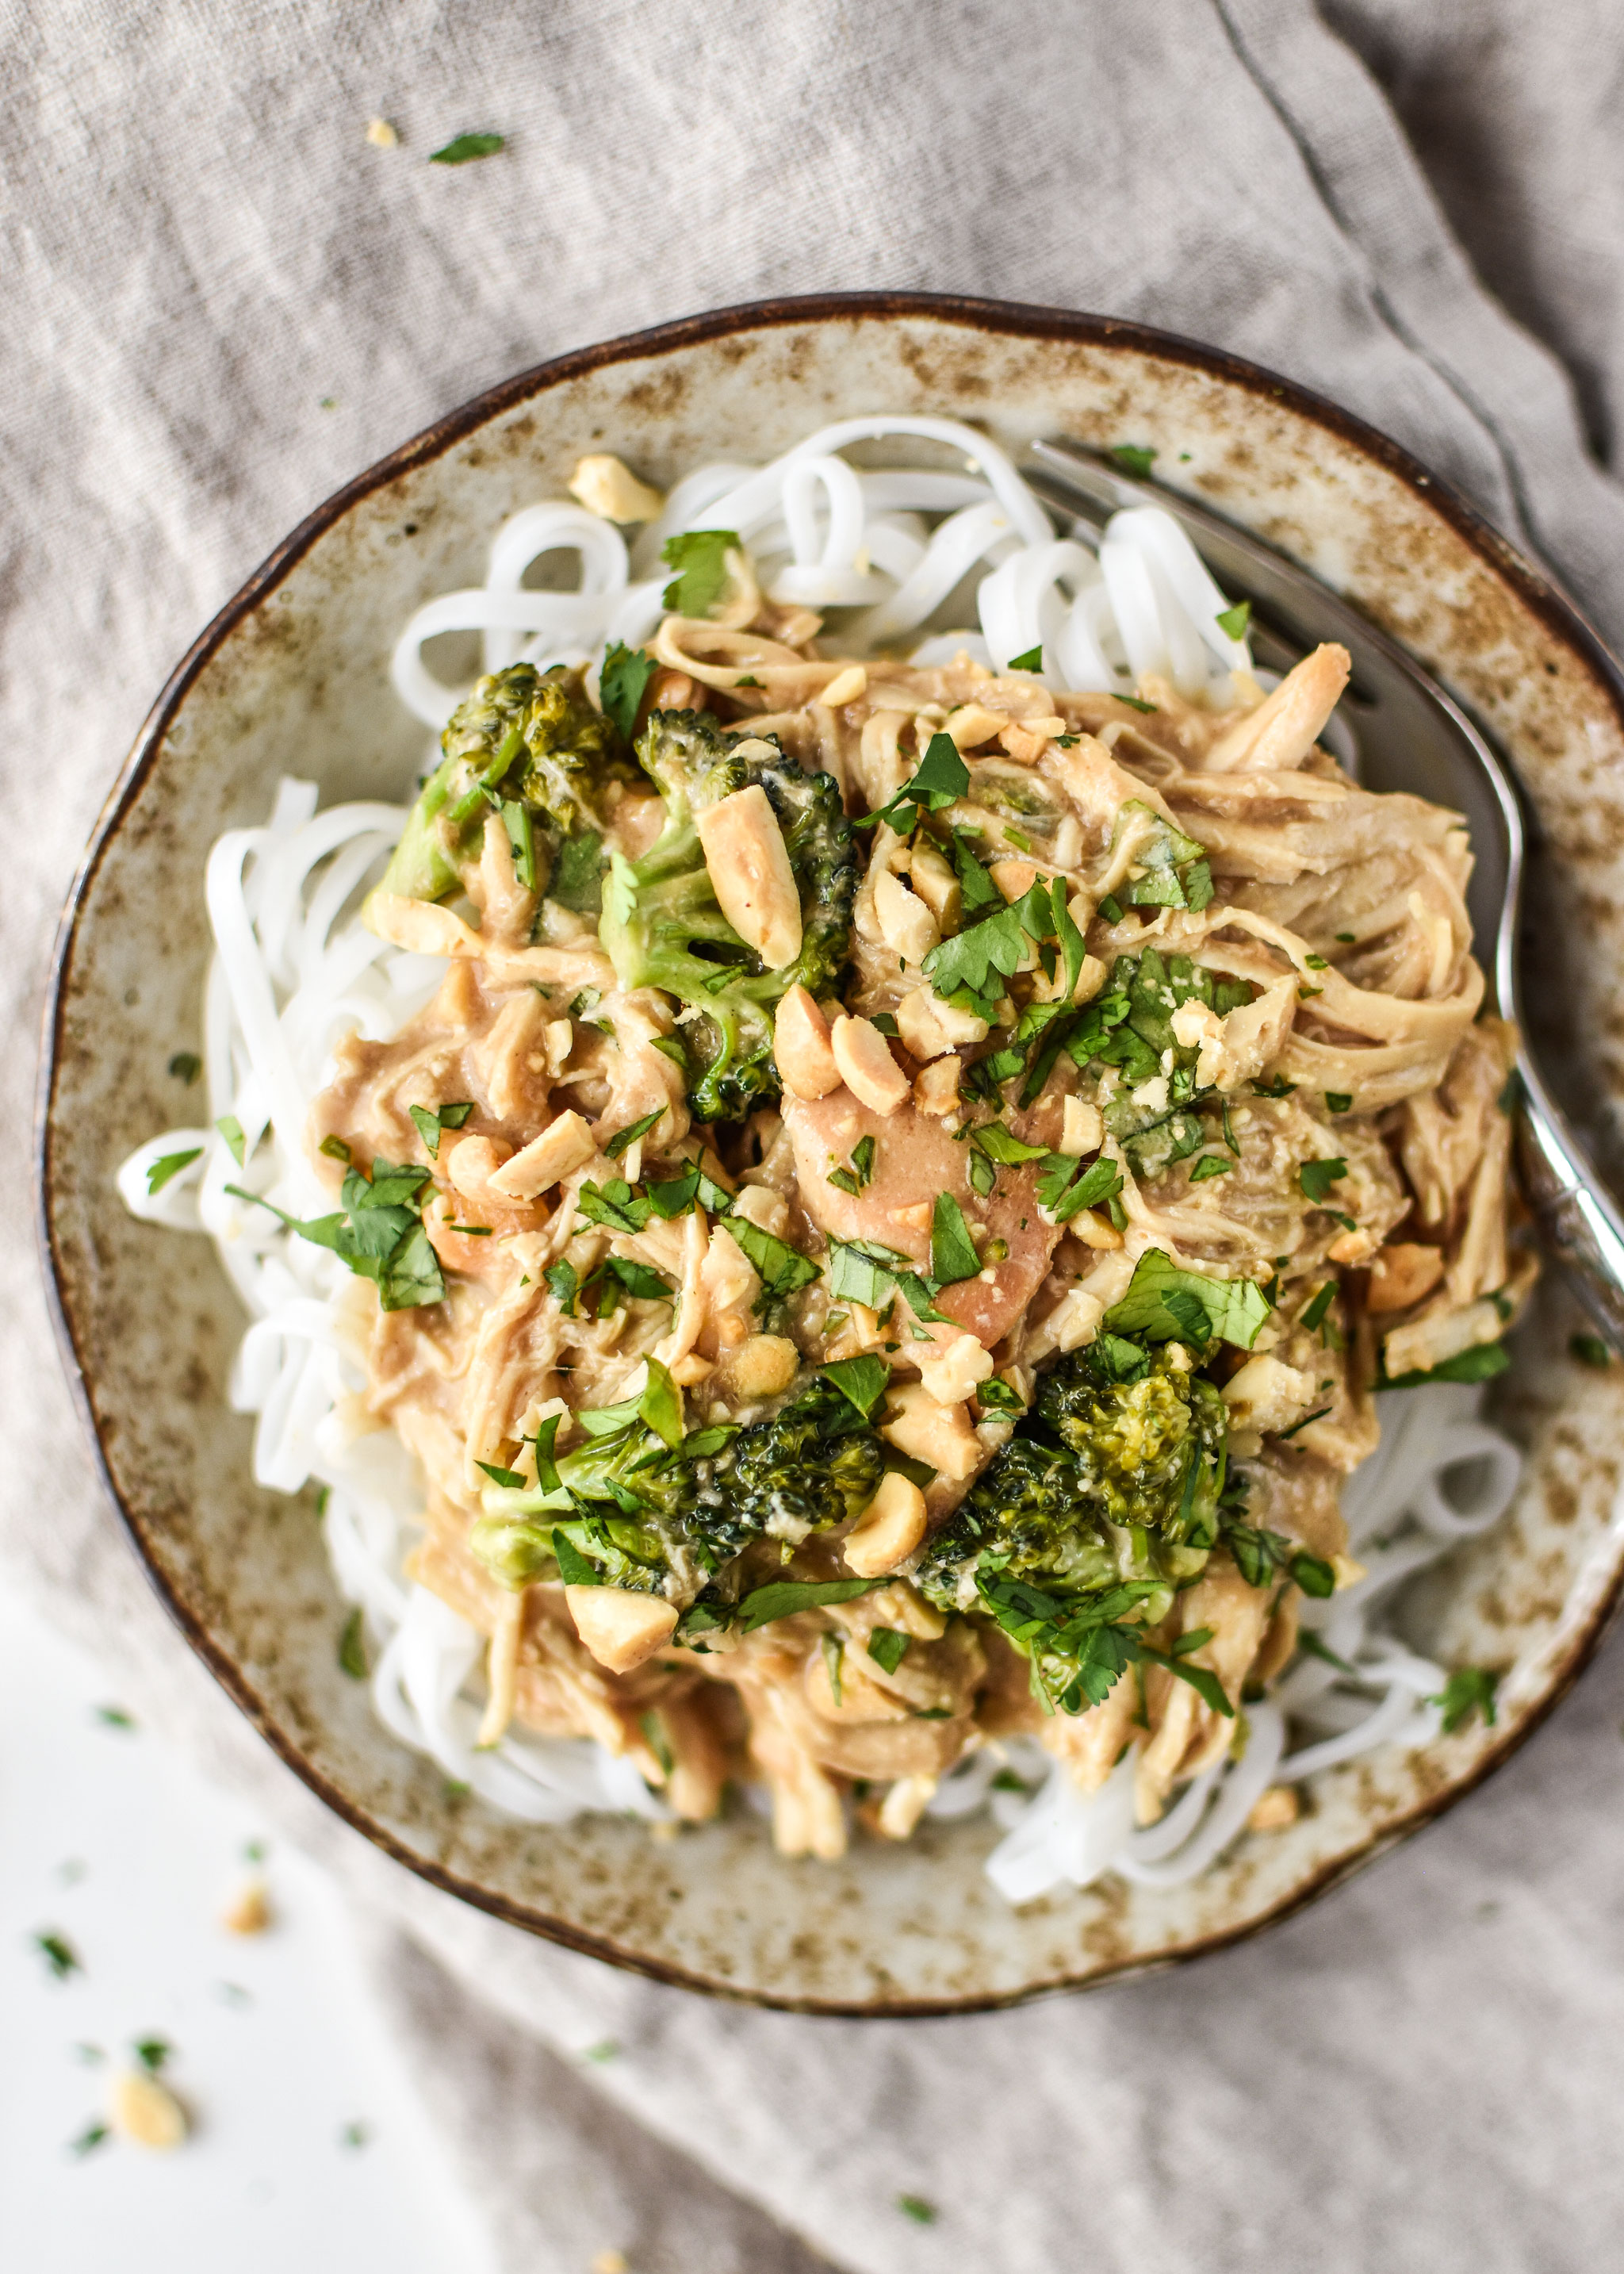 Slow cooker peanut chicken meal prep for lunch served with pad thai rice noodles